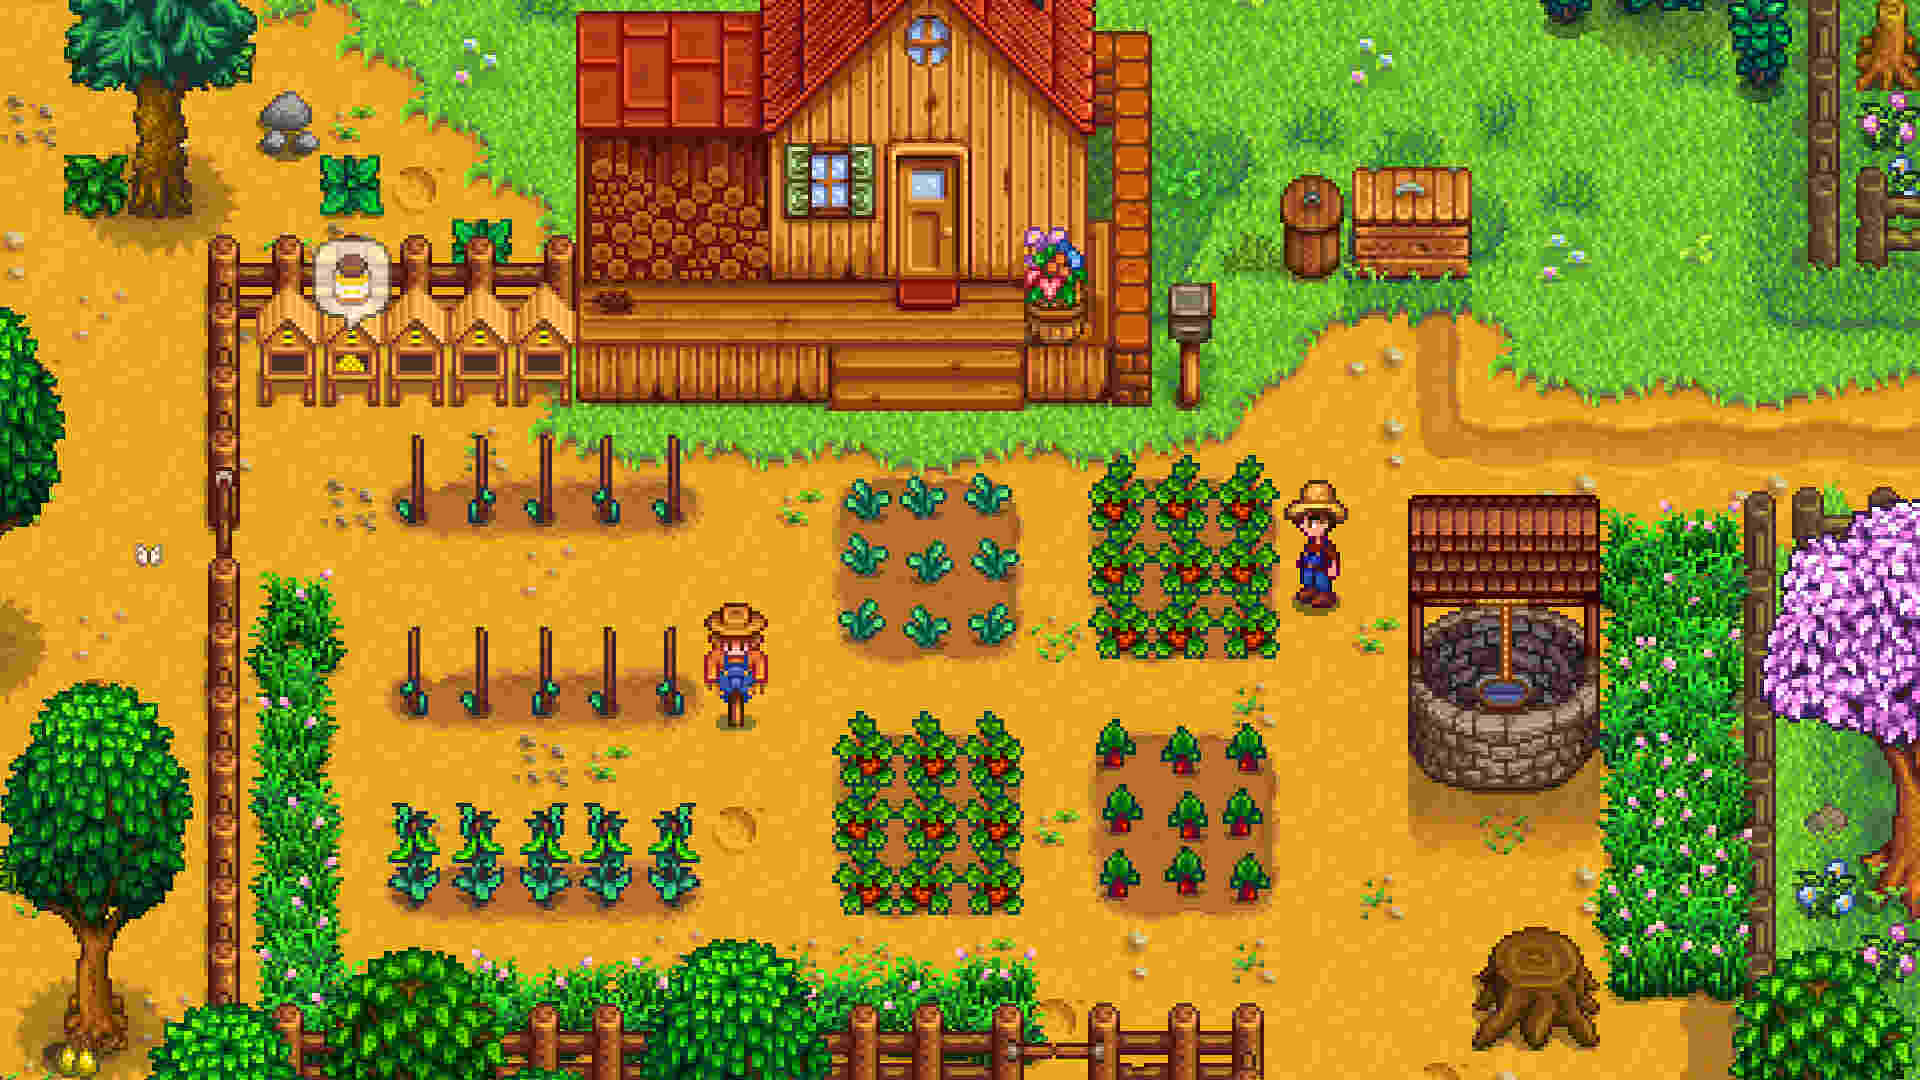 How To Get Cute Stardew Valey Farm Names?